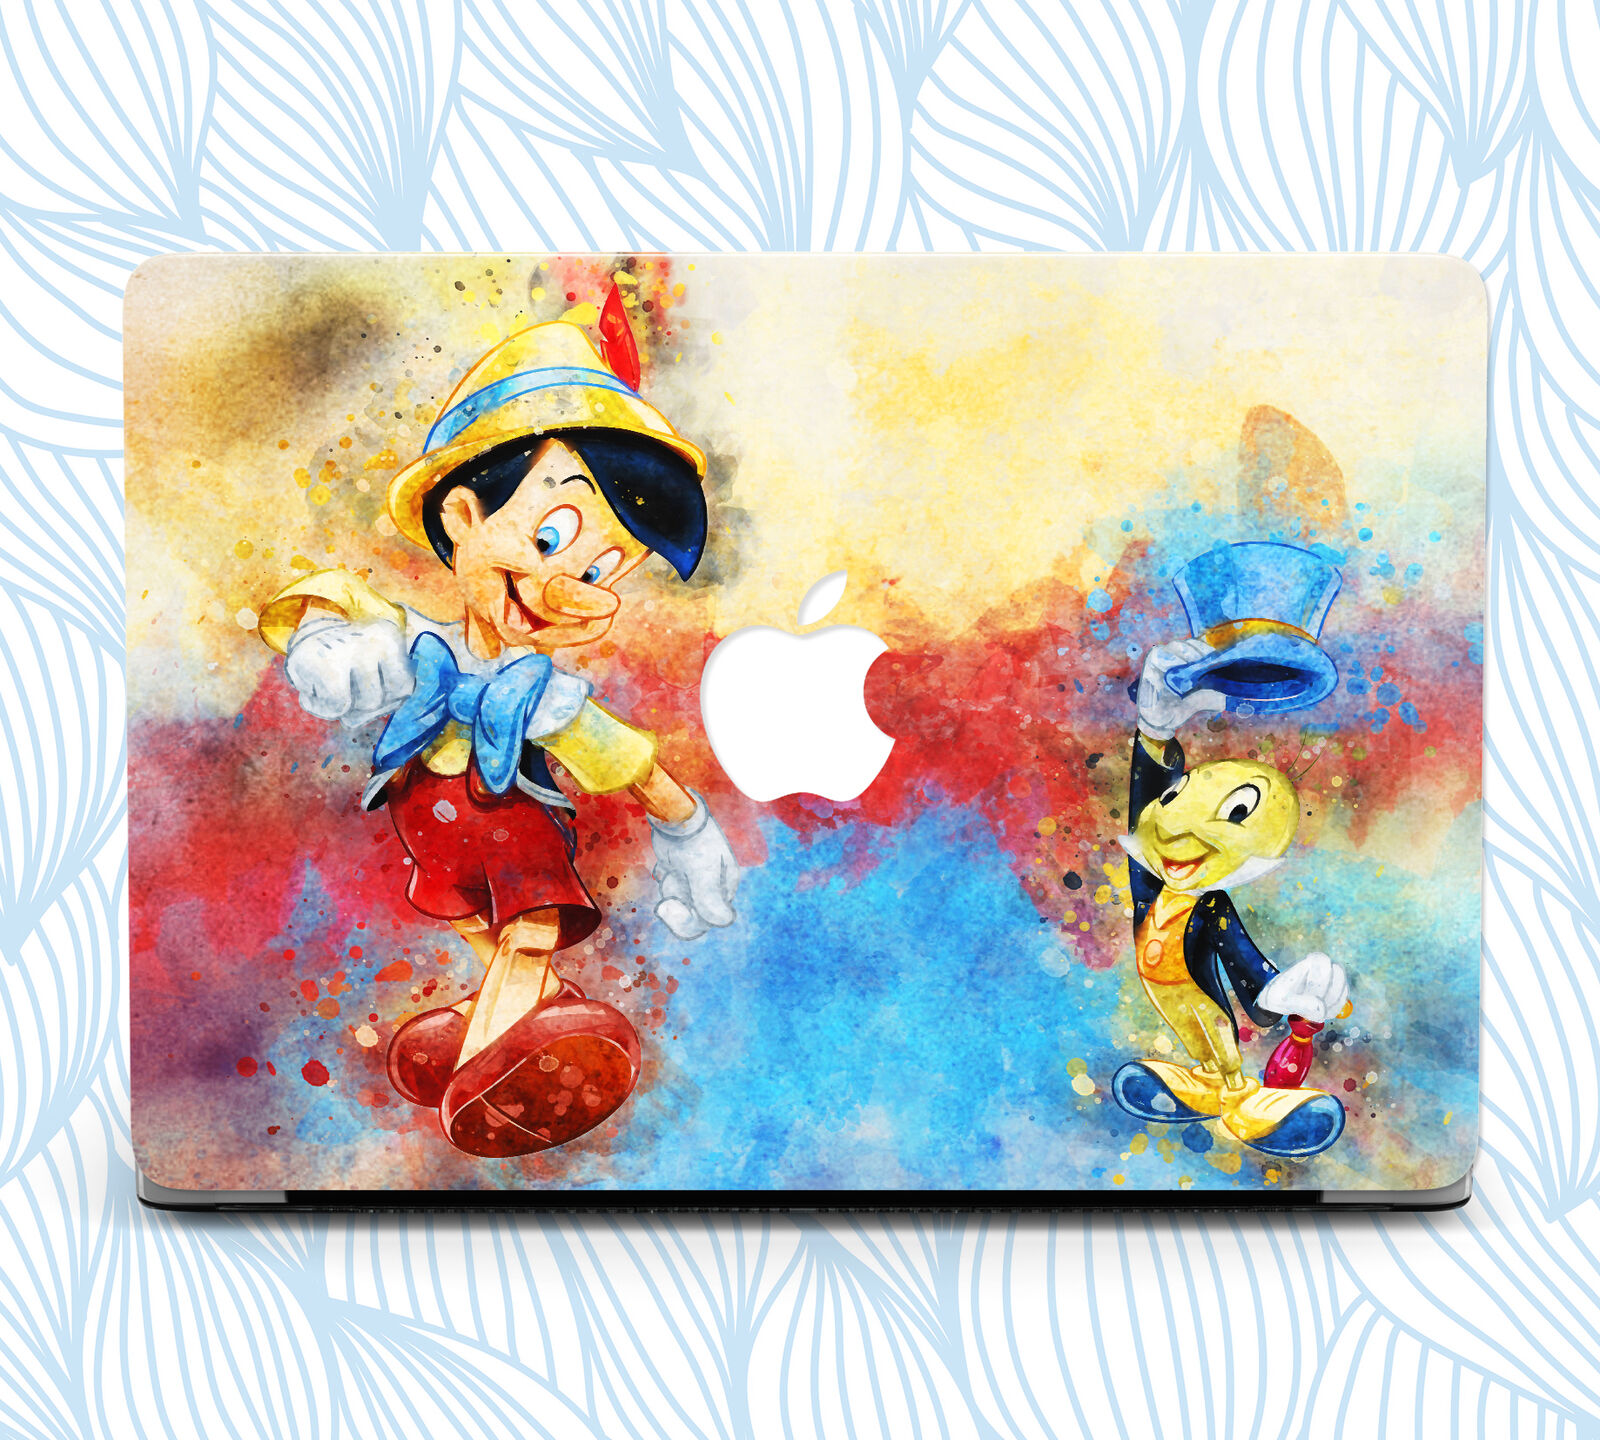 Pinocchio and Jiminy cricket hard macbook case for Air Pro 13\